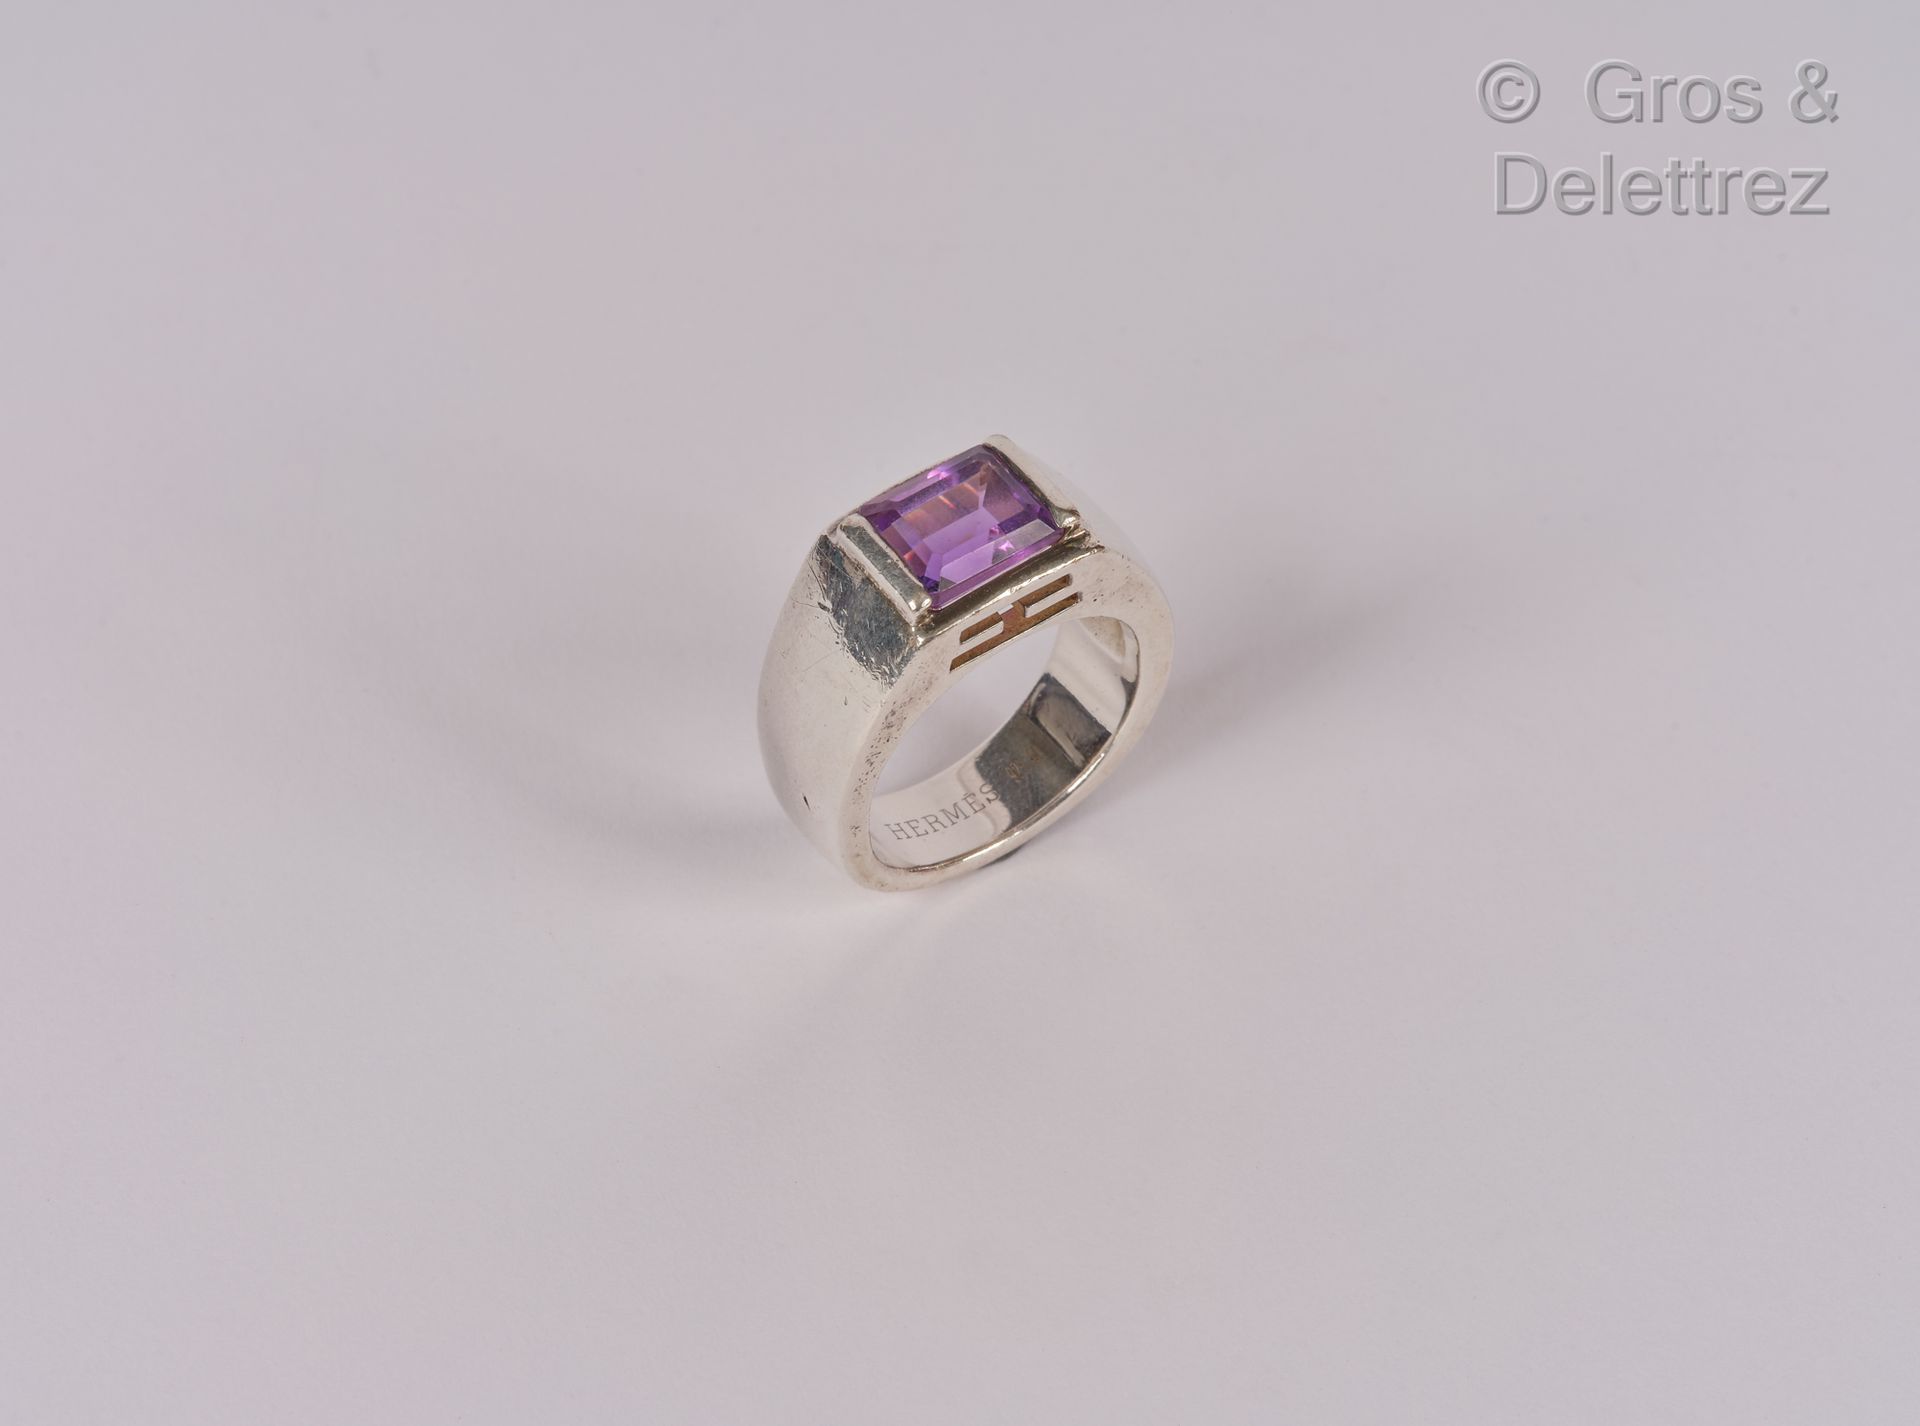 HERMES Paris Silver ring 925 thousandths topped by an amethyst. T. 60. (Scratche&hellip;